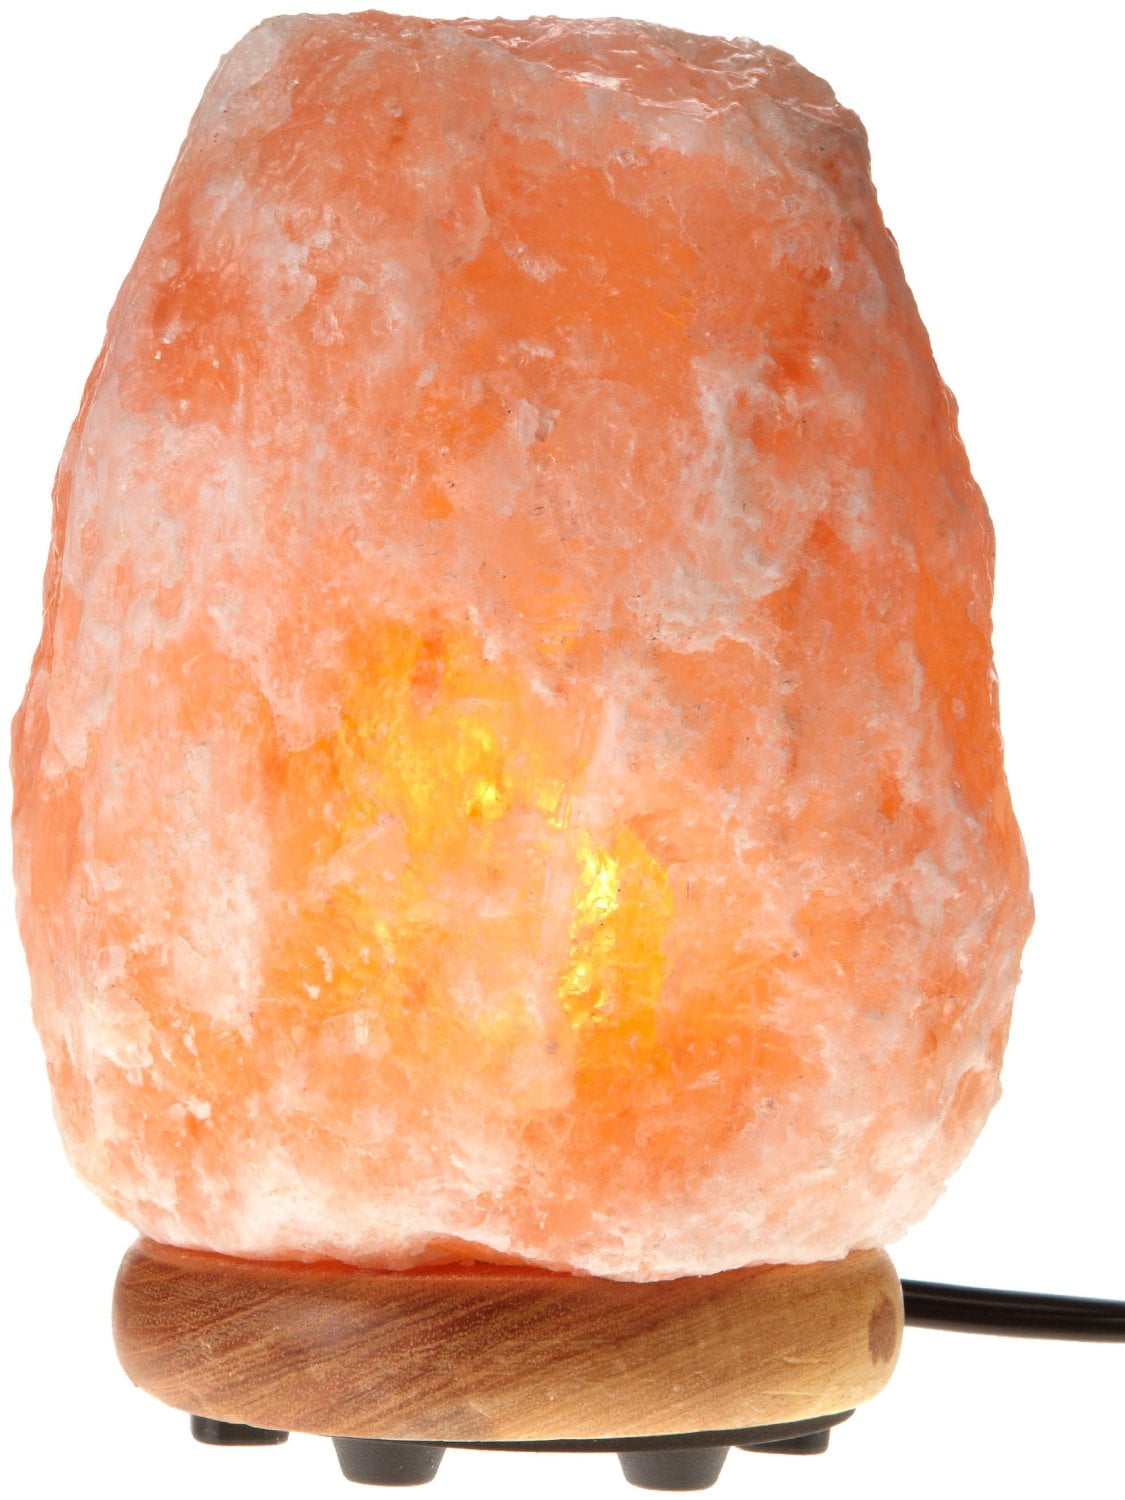 6-7lbs Large Wetsone Himalayan Salt Lamp Rock With Bulb Electric Wire Wood Base Fine Pink Rock Salt Lamp For Desk Table Natural Ionic Action 8 to 9 Inch high